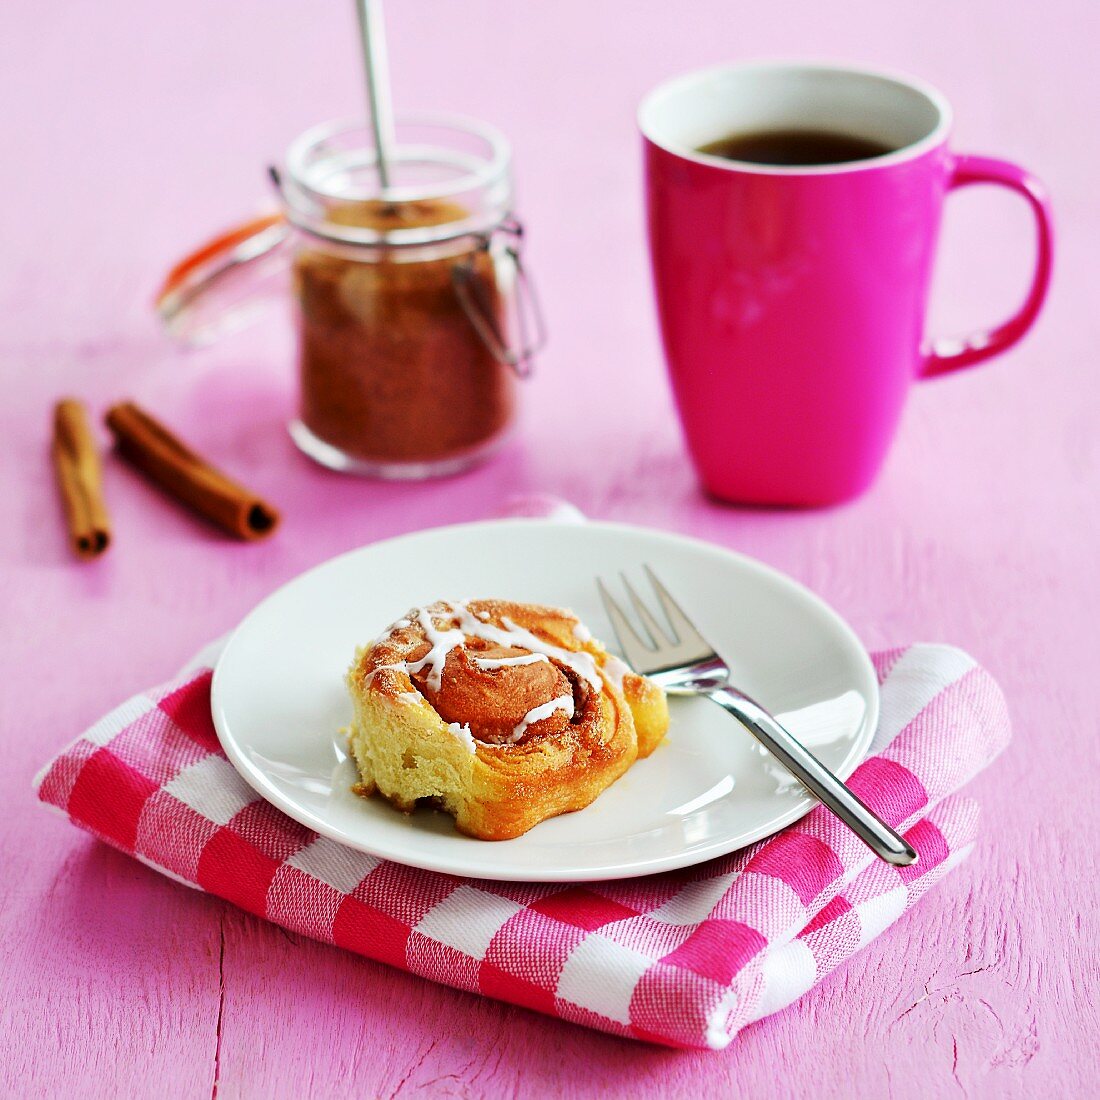 A cinnamon roll served with tea